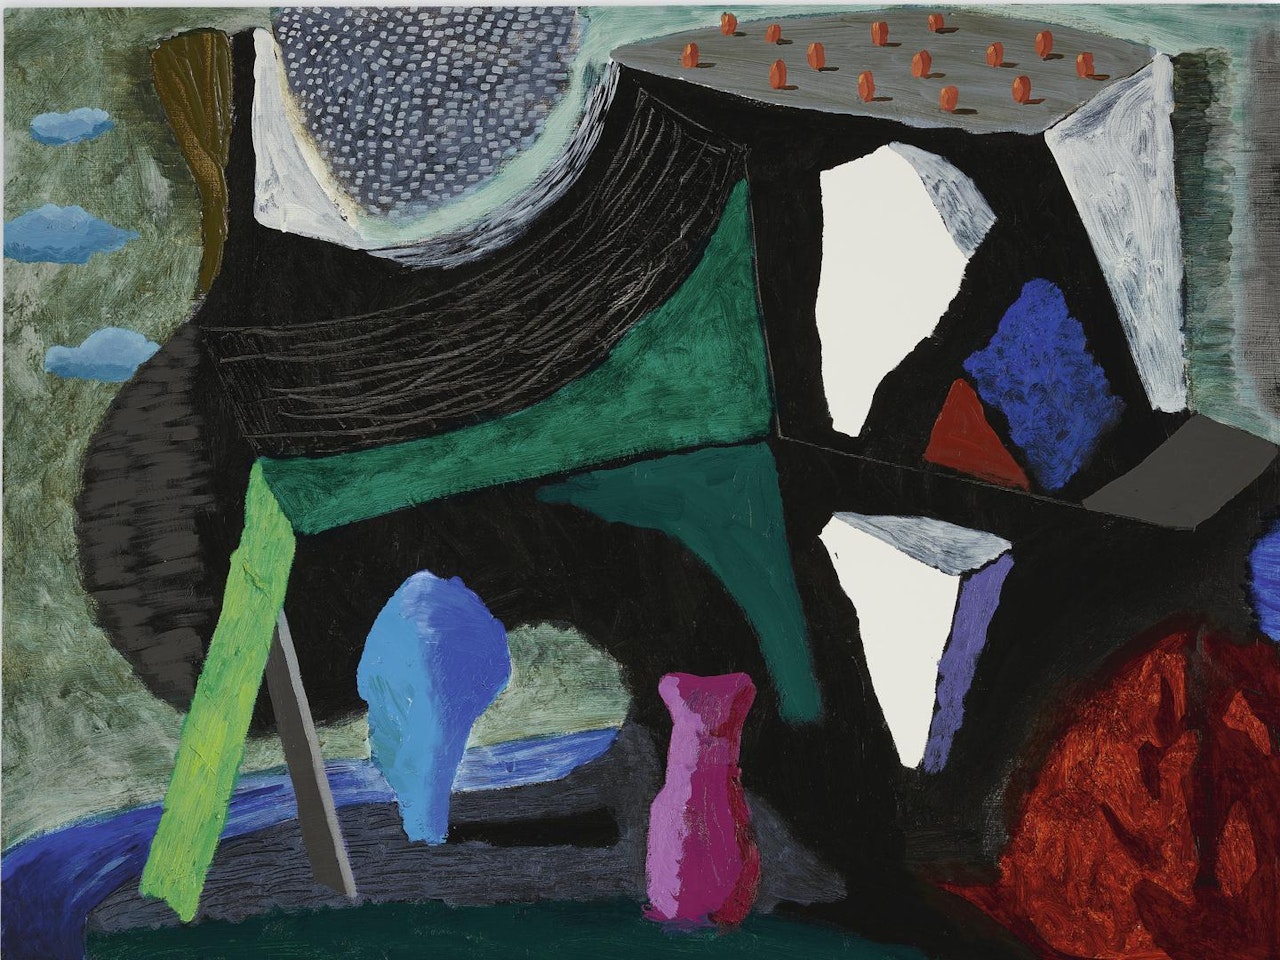 WHAT ABOUT THE CAVES by David Hockney